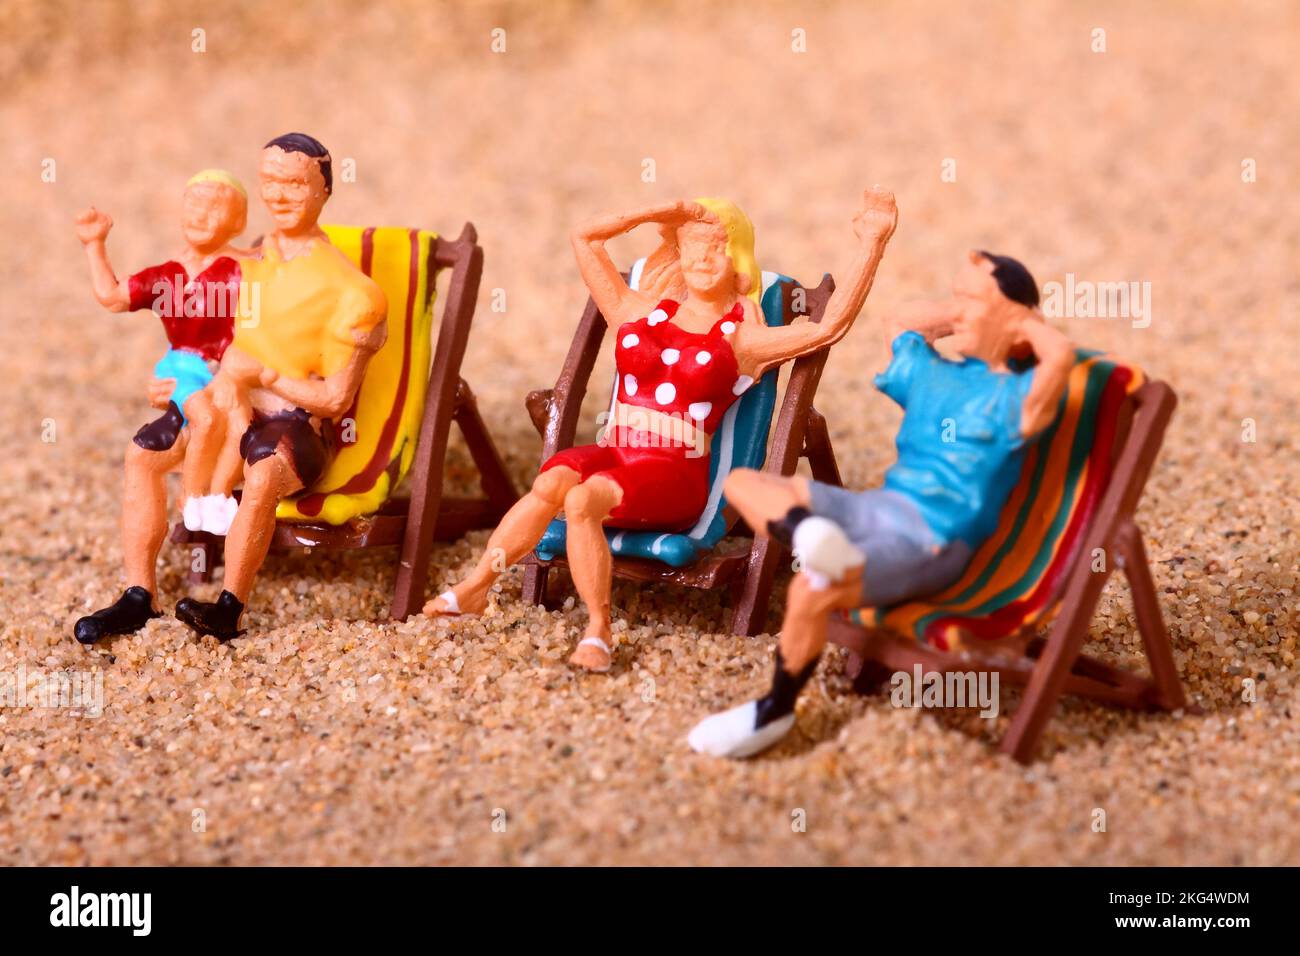 Conceptual image of miniature figure people sat on deck chairs on a sandy beach, Holiday vacation concept Stock Photo